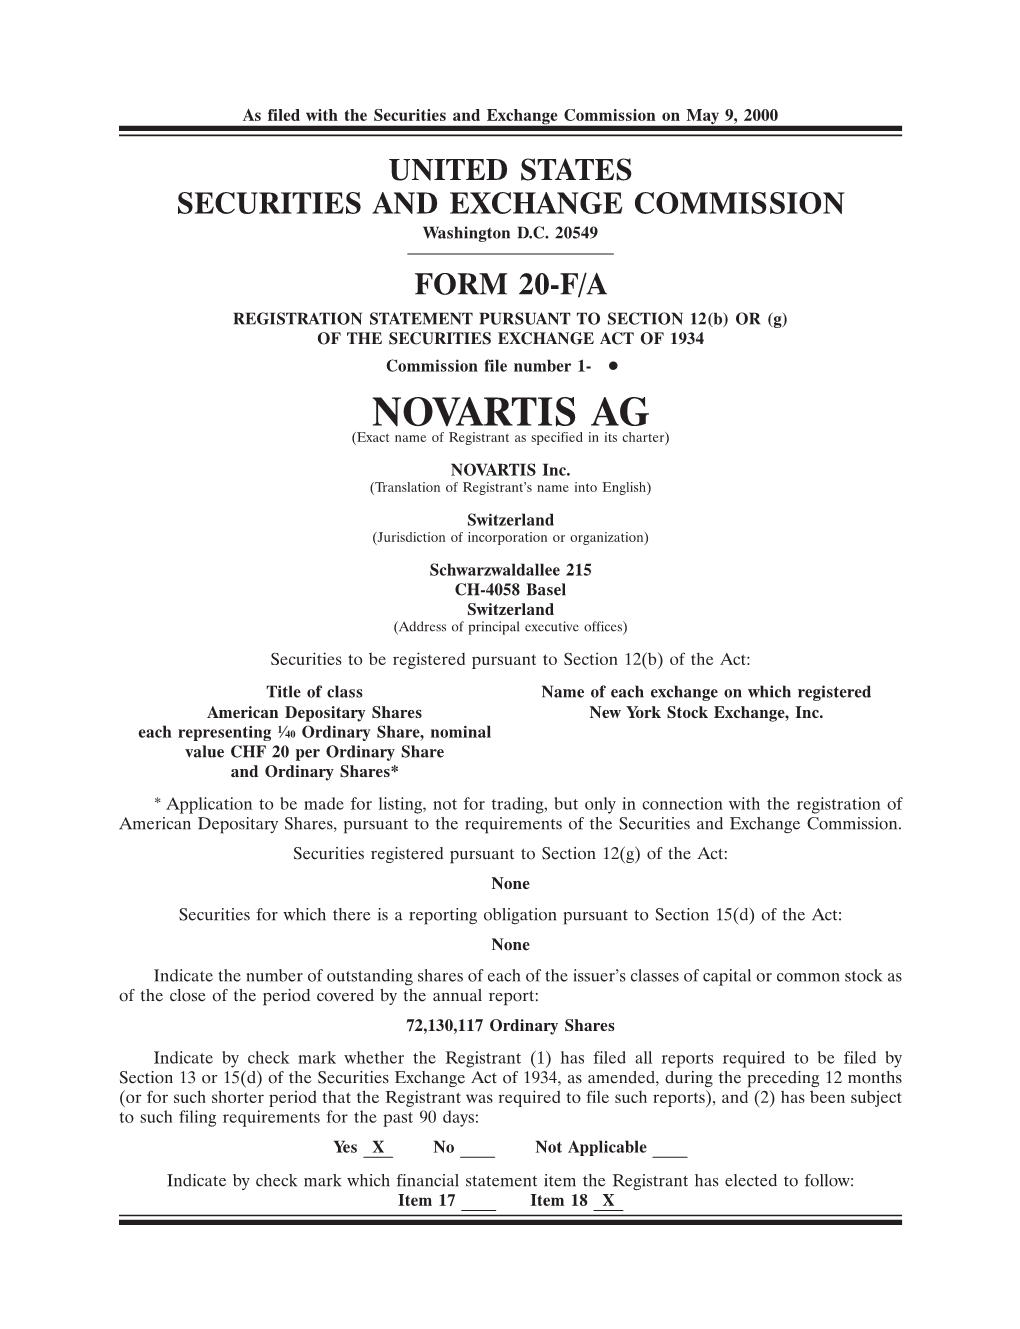 NOVARTIS AG (Exact Name of Registrant As Specified in Its Charter)